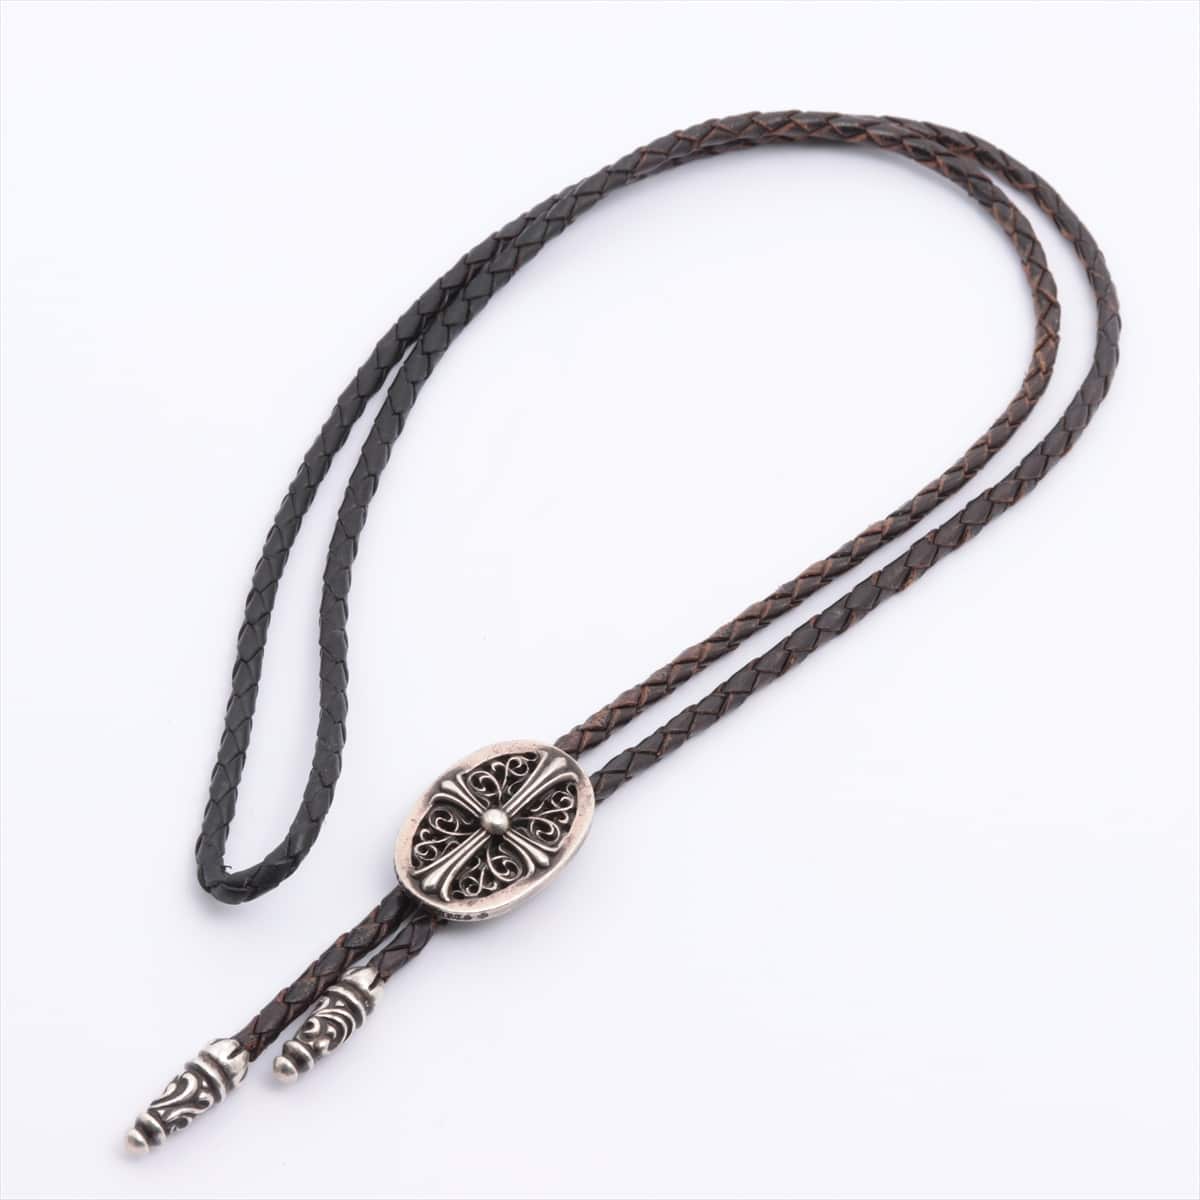 Chrome Hearts Tiny classic oval cross Necklace Leather & 925 55.0g Bolo tie